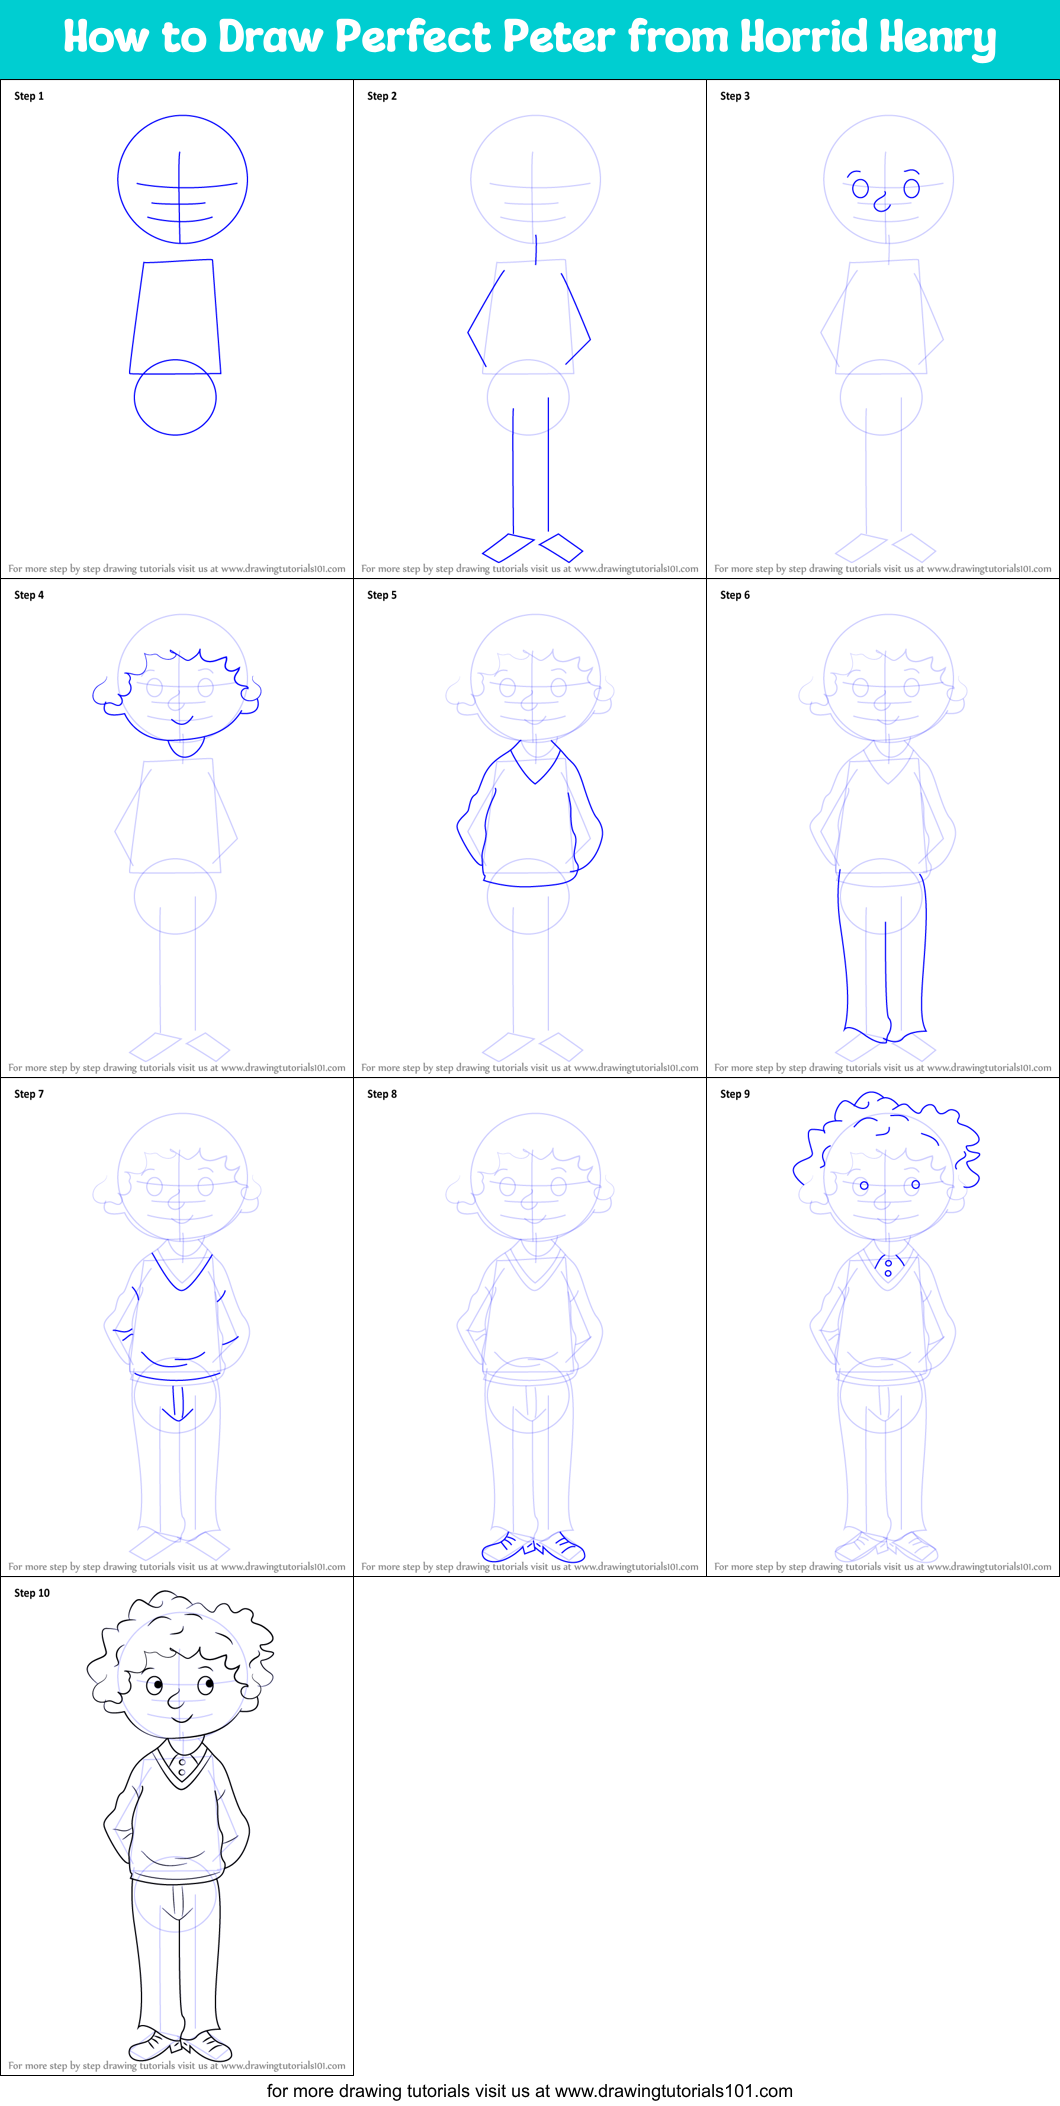 How to Draw Perfect Peter from Horrid Henry printable step